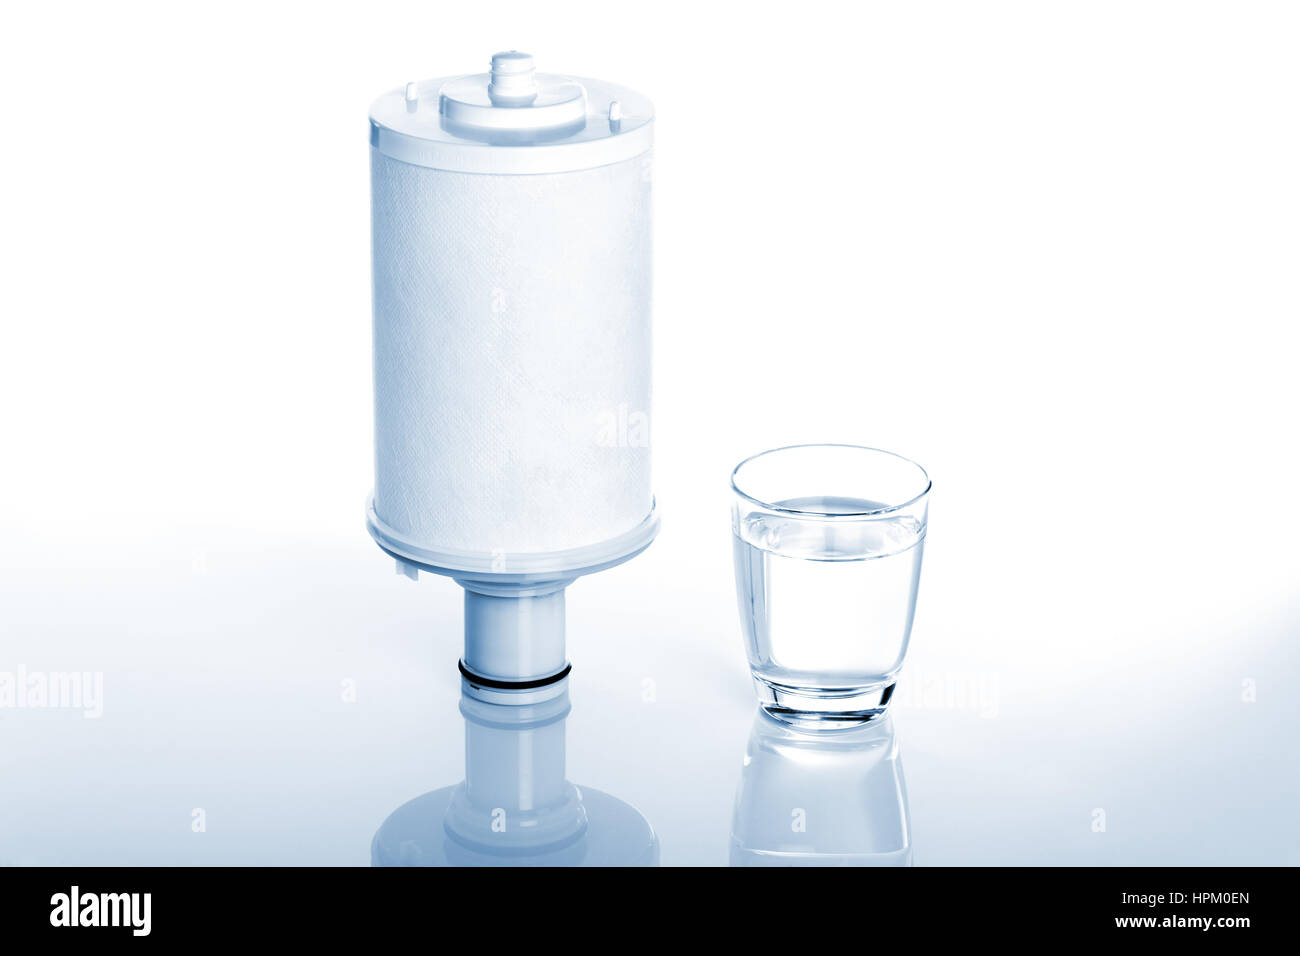 new cartridge for water purifier on white background Stock Photo - Alamy